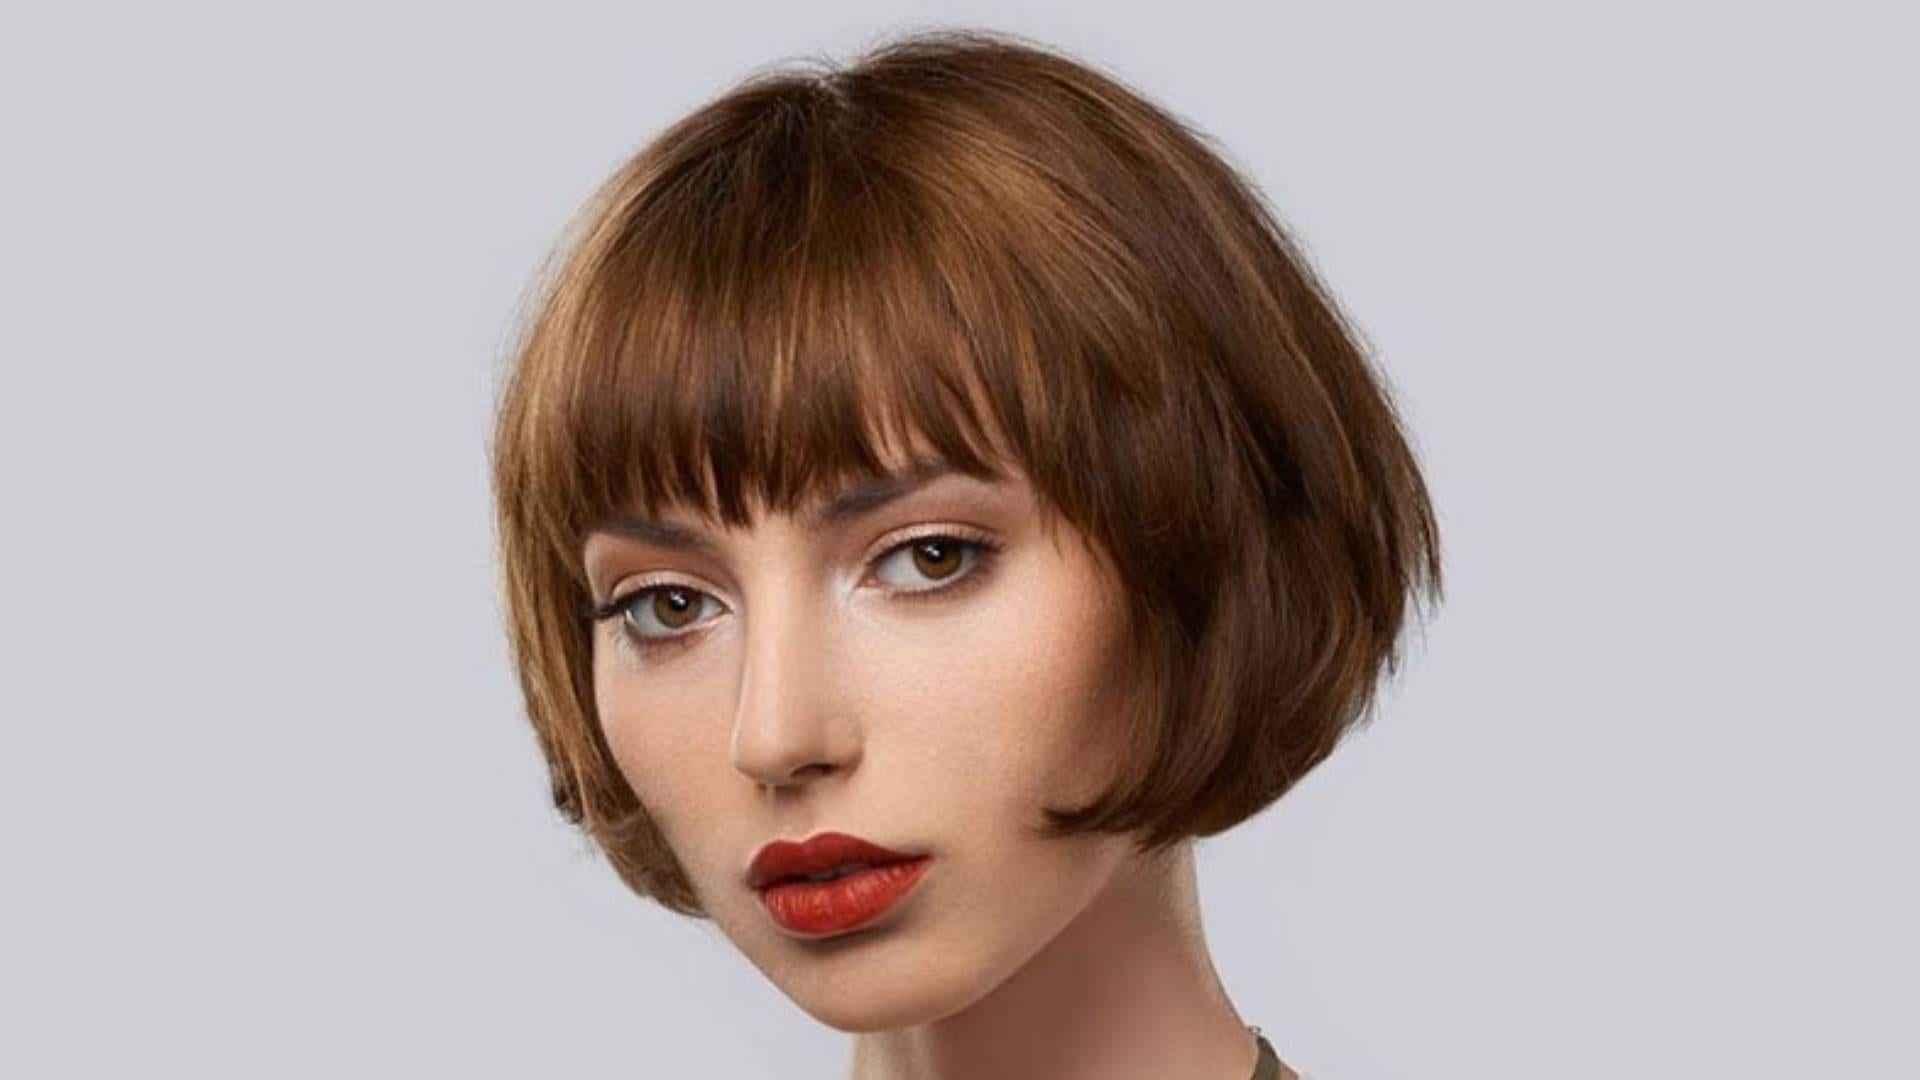 Trending Hair Styles in 2019 - Bob With Bangs - Mallory Cook